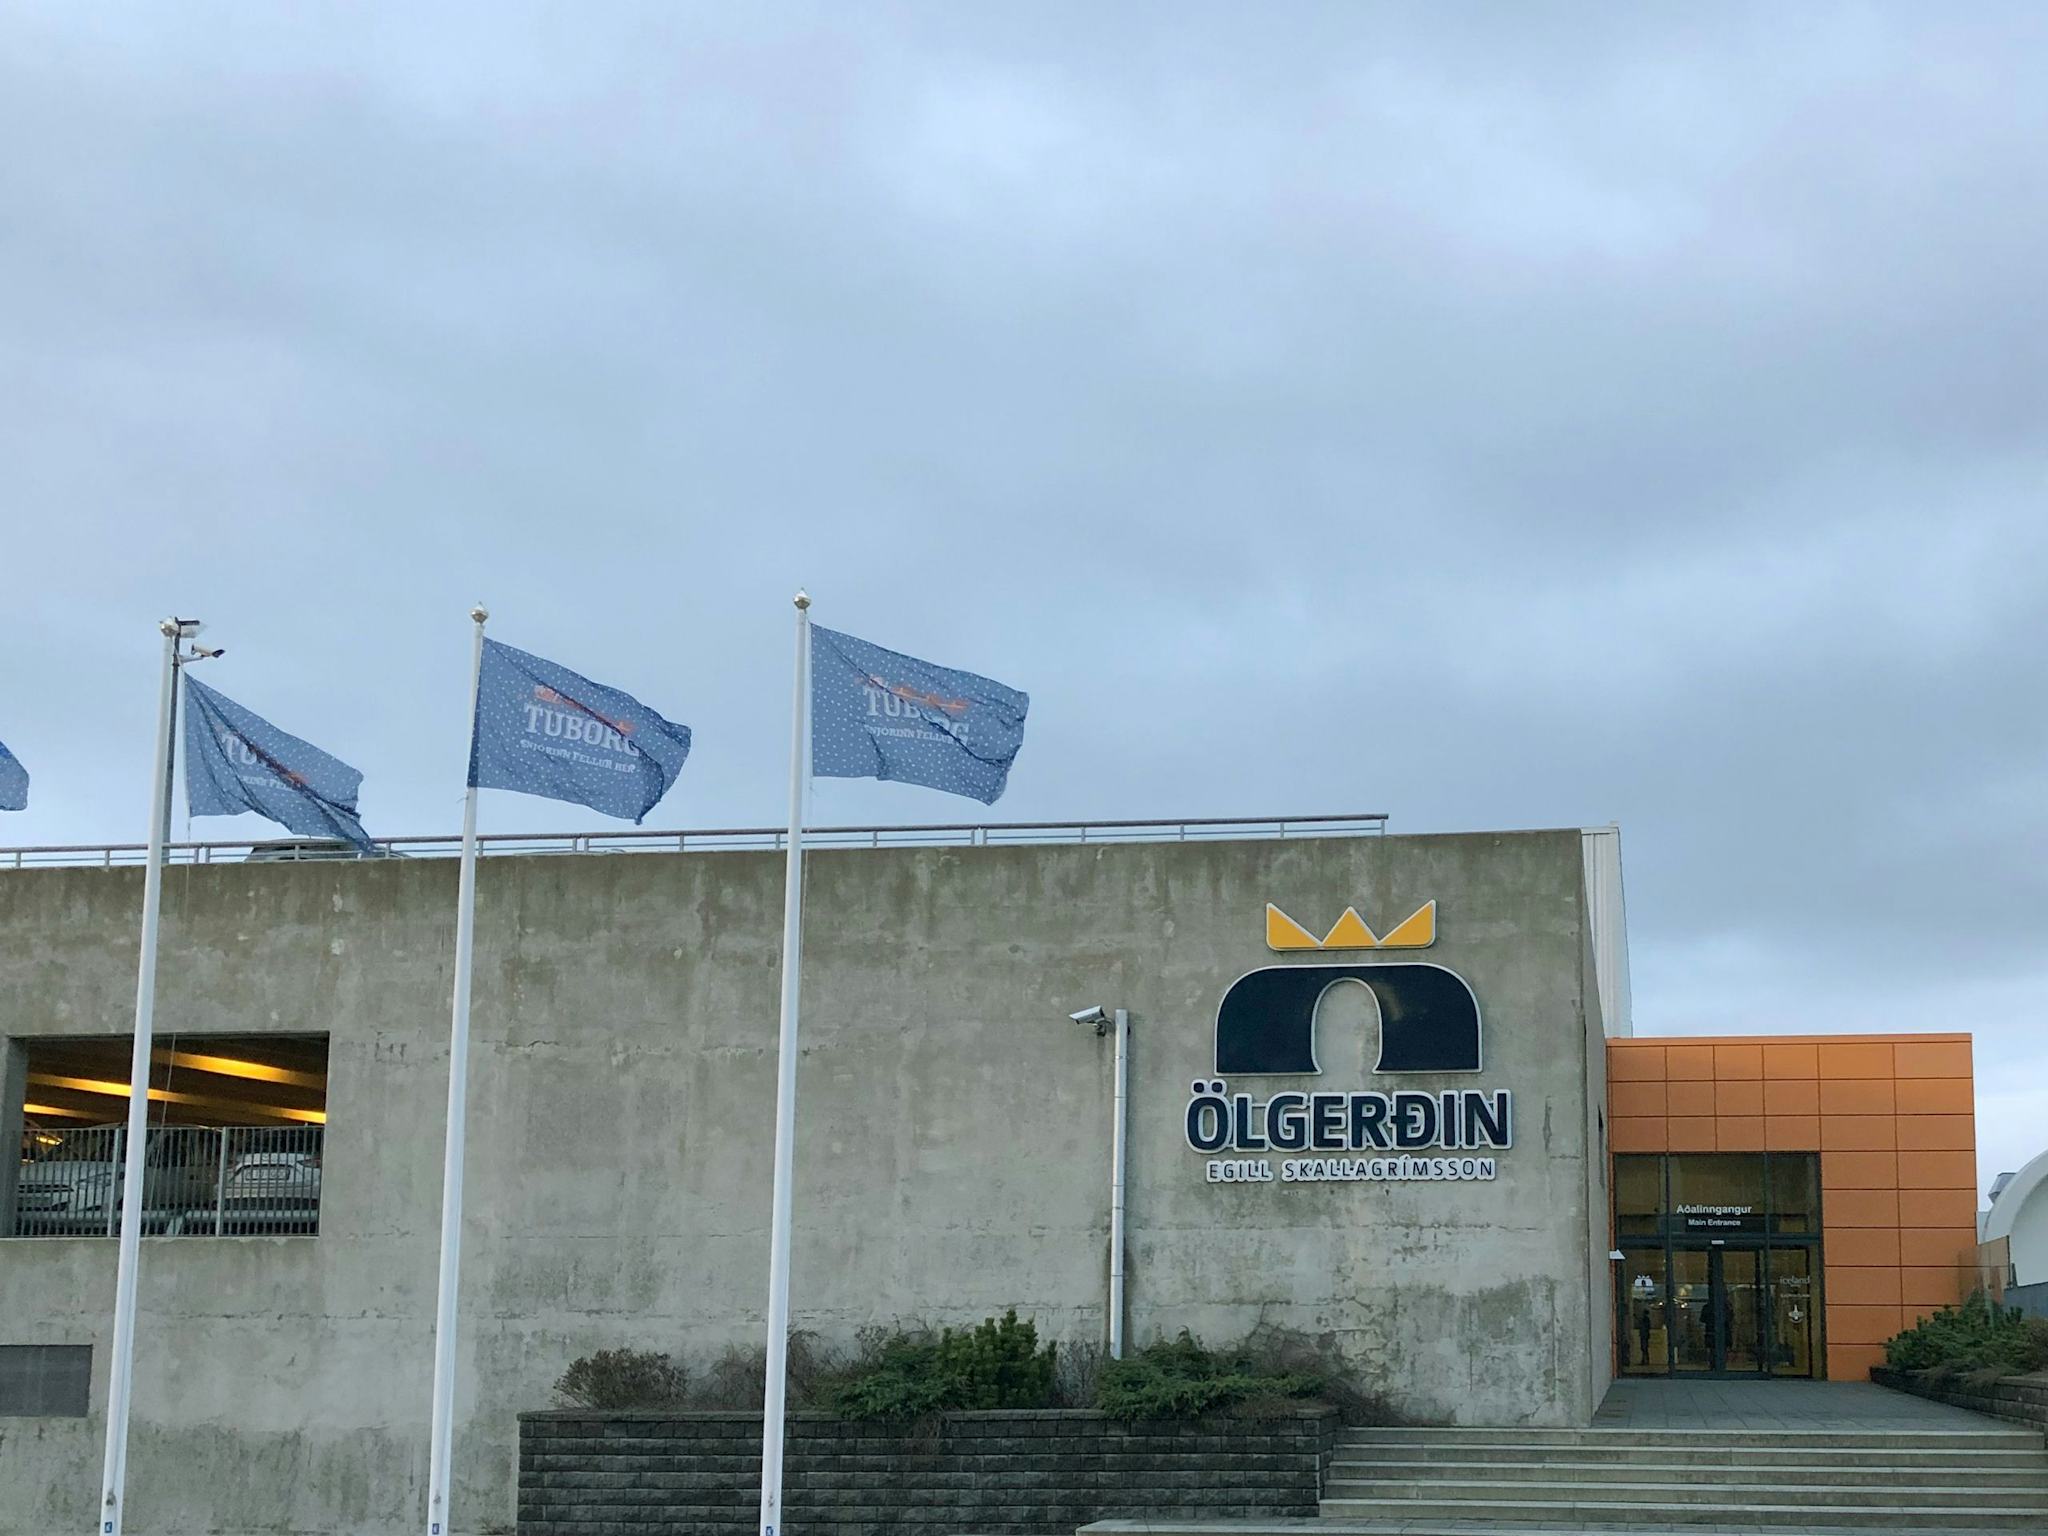 The image displays the front of a building with "Olgerdin" logo and three flags fluttering in the wind